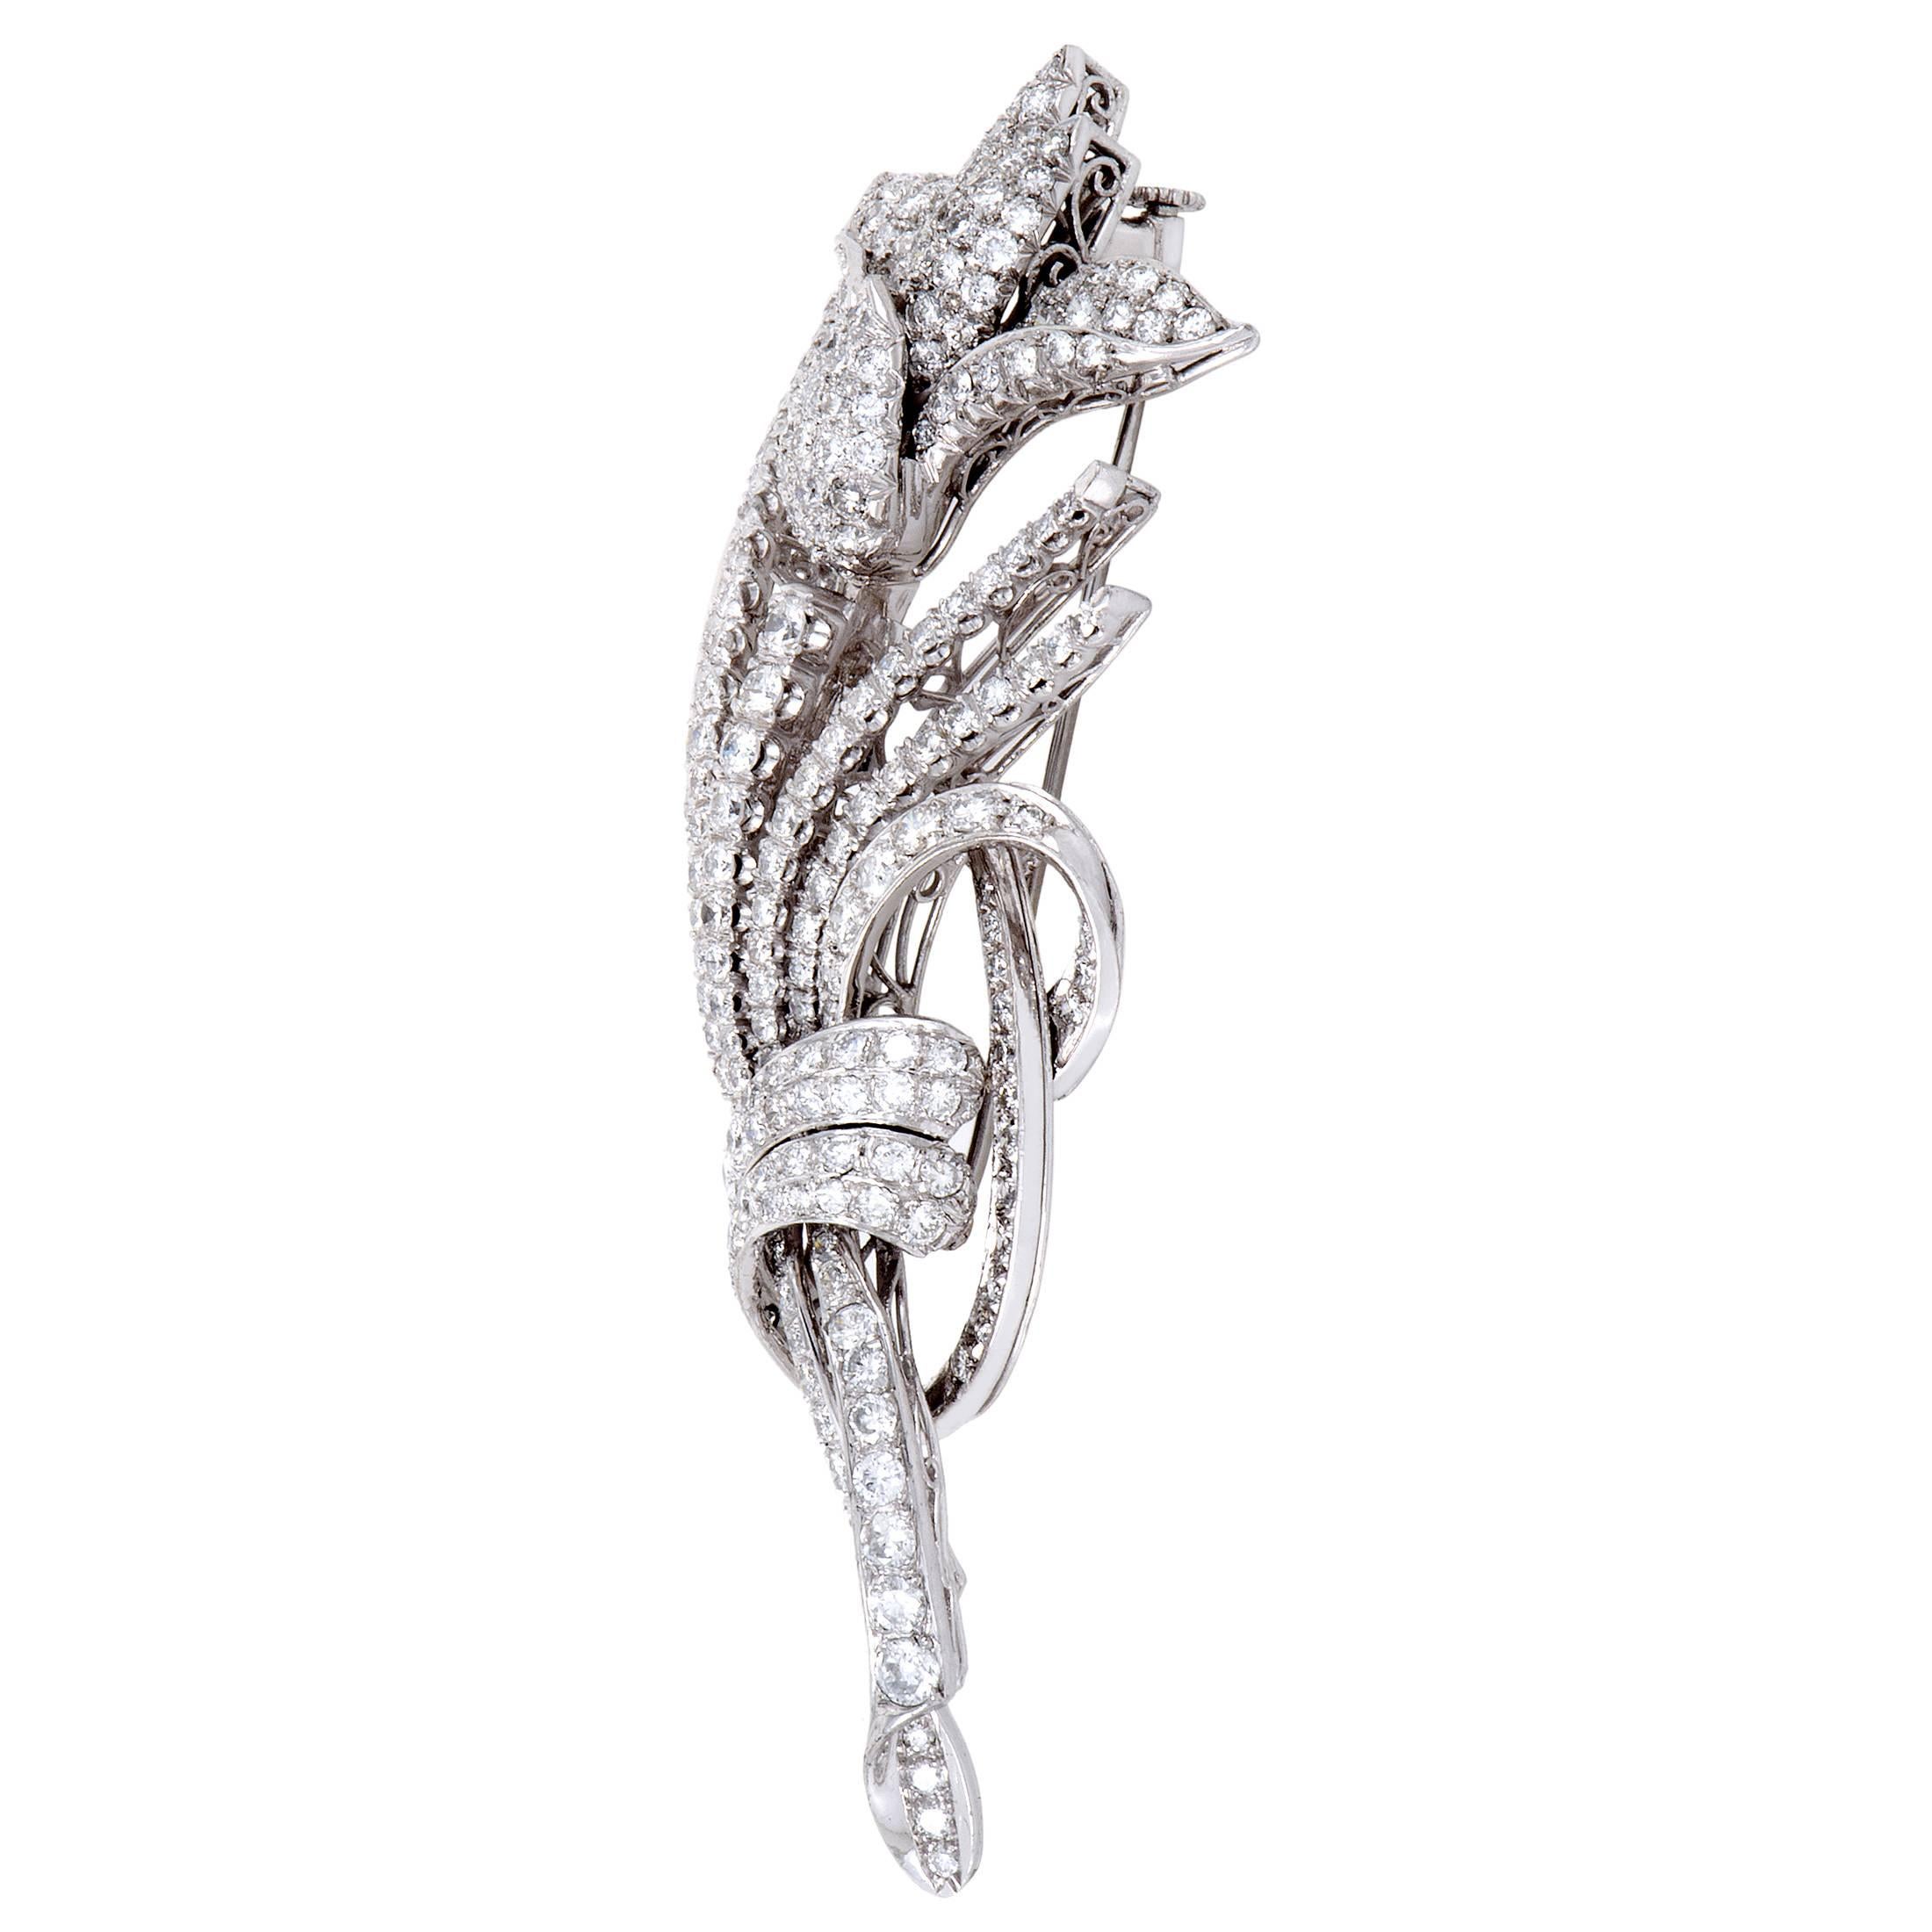 Embellished with exquisitely set and fascinatingly arranged diamonds amounting approximately to 7.50 carats, this extraordinary brooch made of gleaming 18K white gold offers a look of dazzling luxury and produces an eye-catching effect.